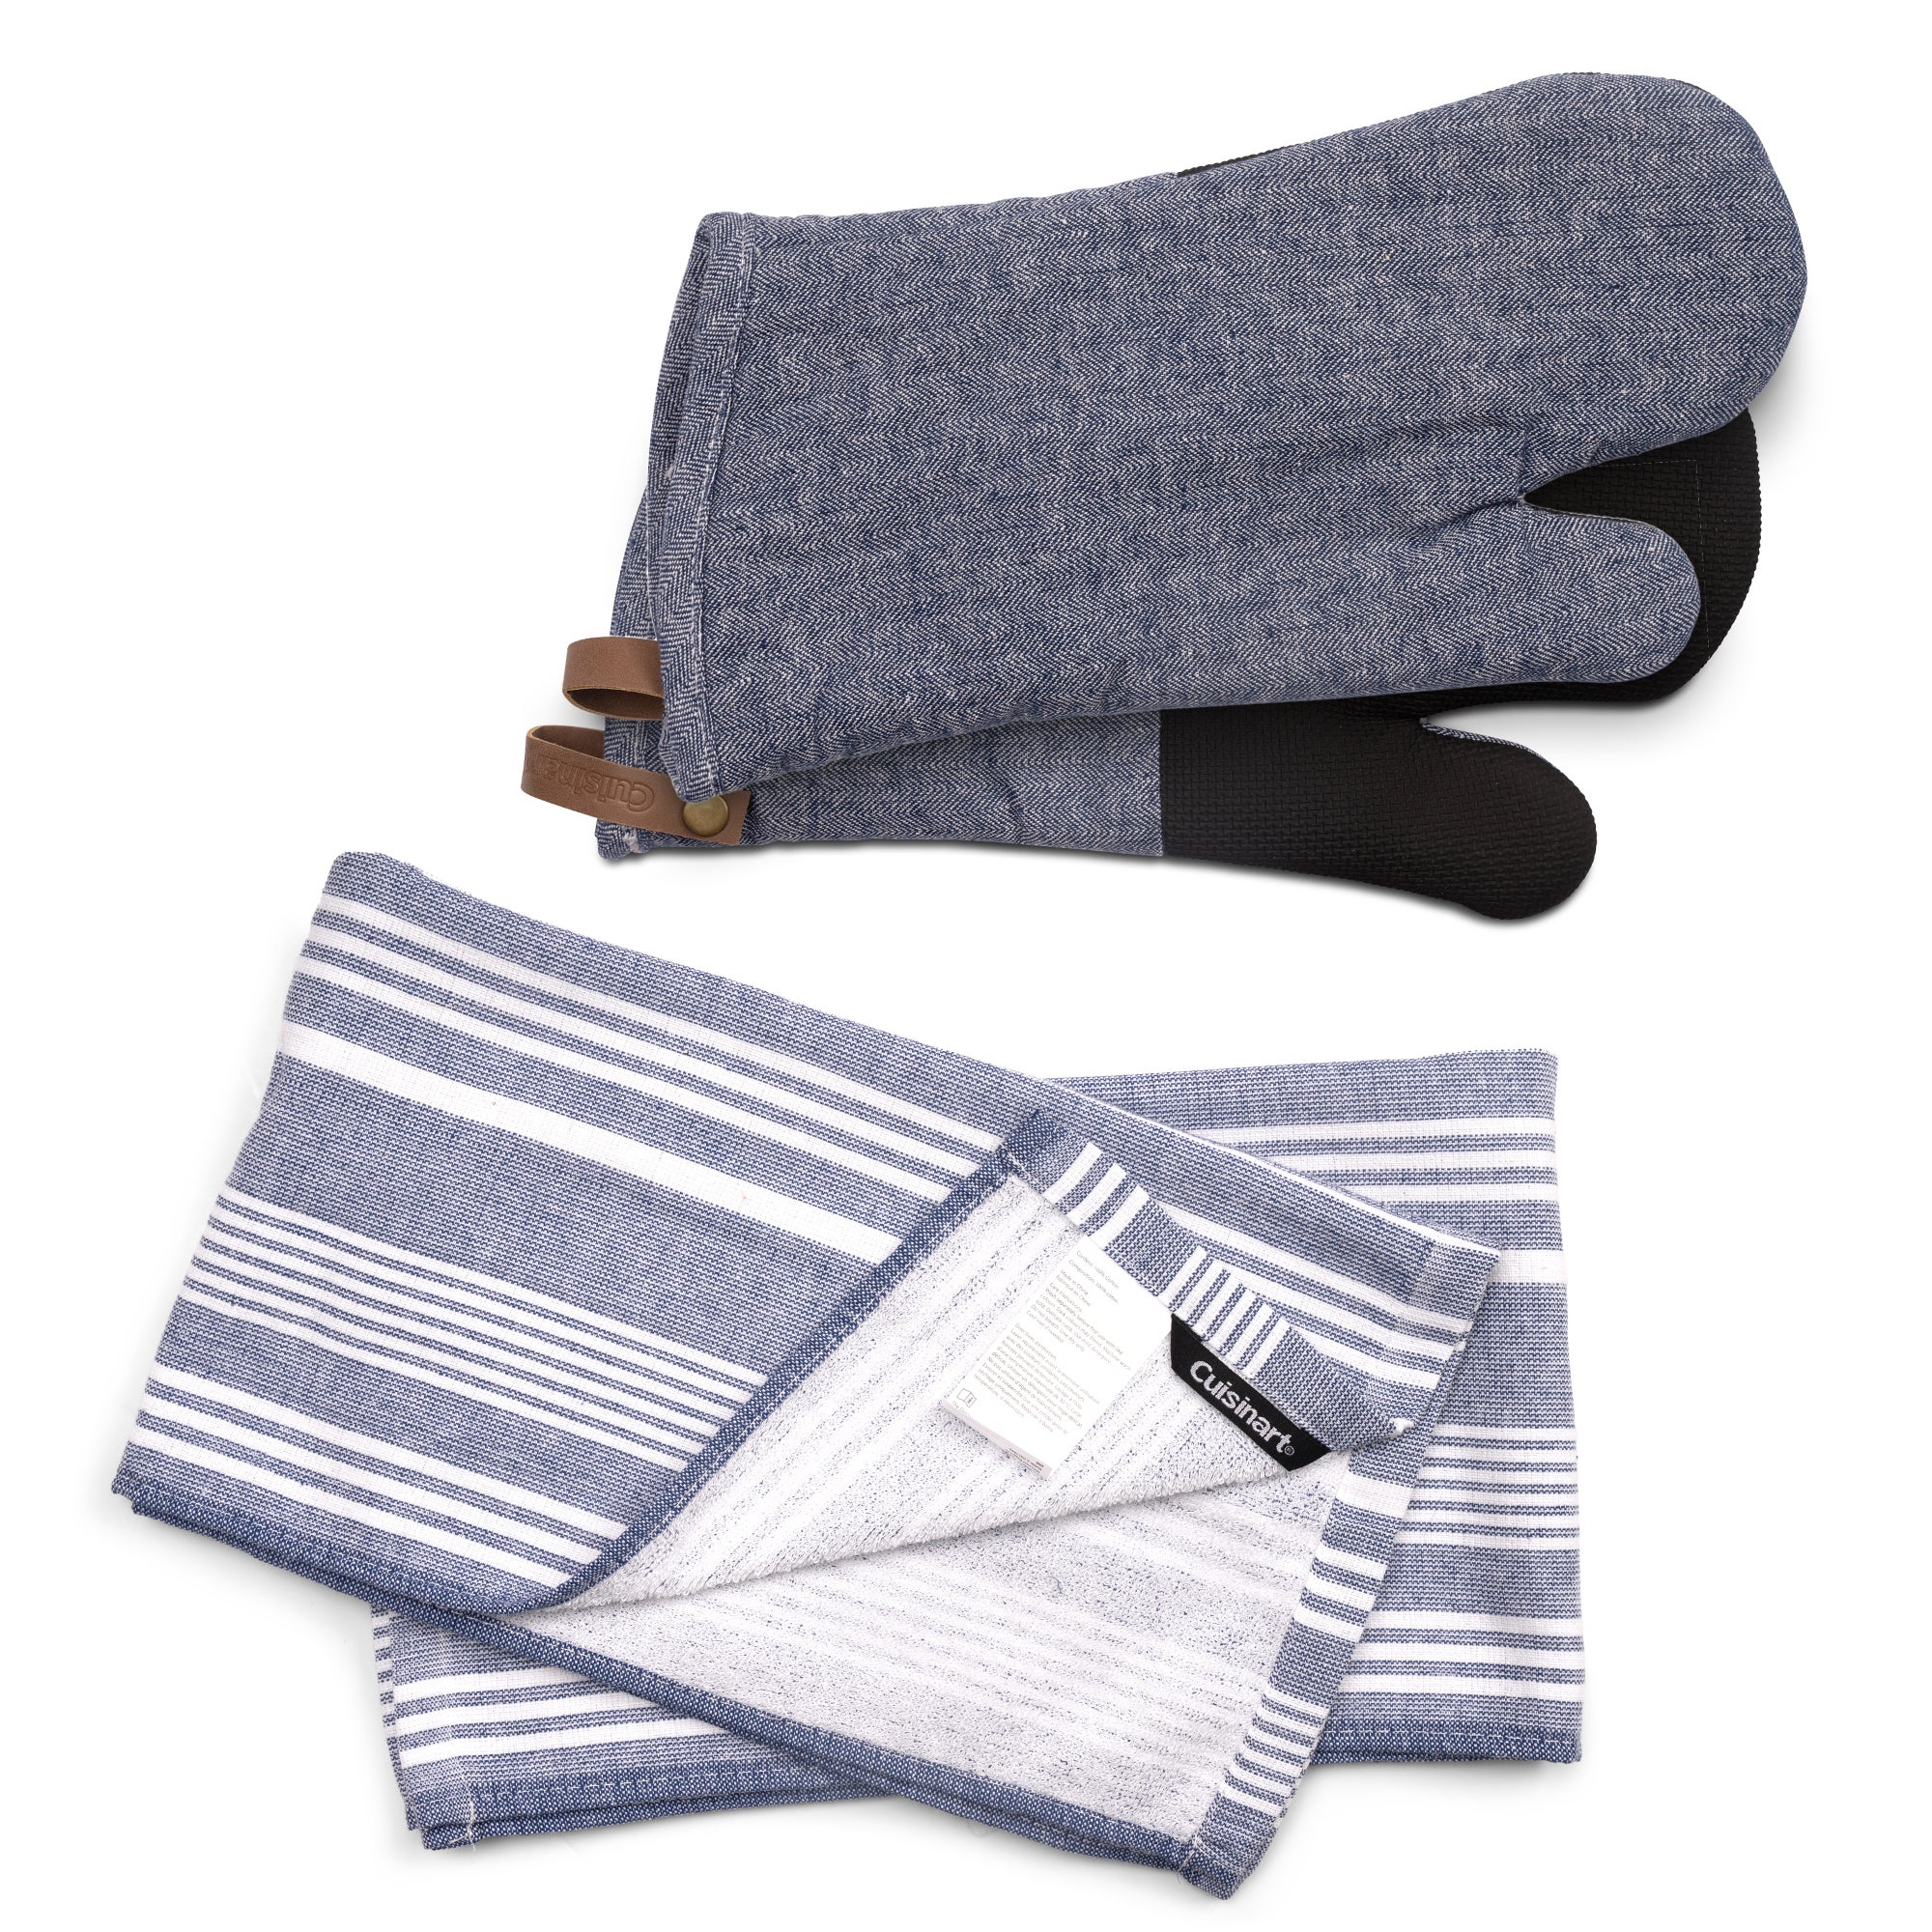 Cuisinart Set Of 2 Blue Striped Tea Towels And Single Oven Gloves Blue